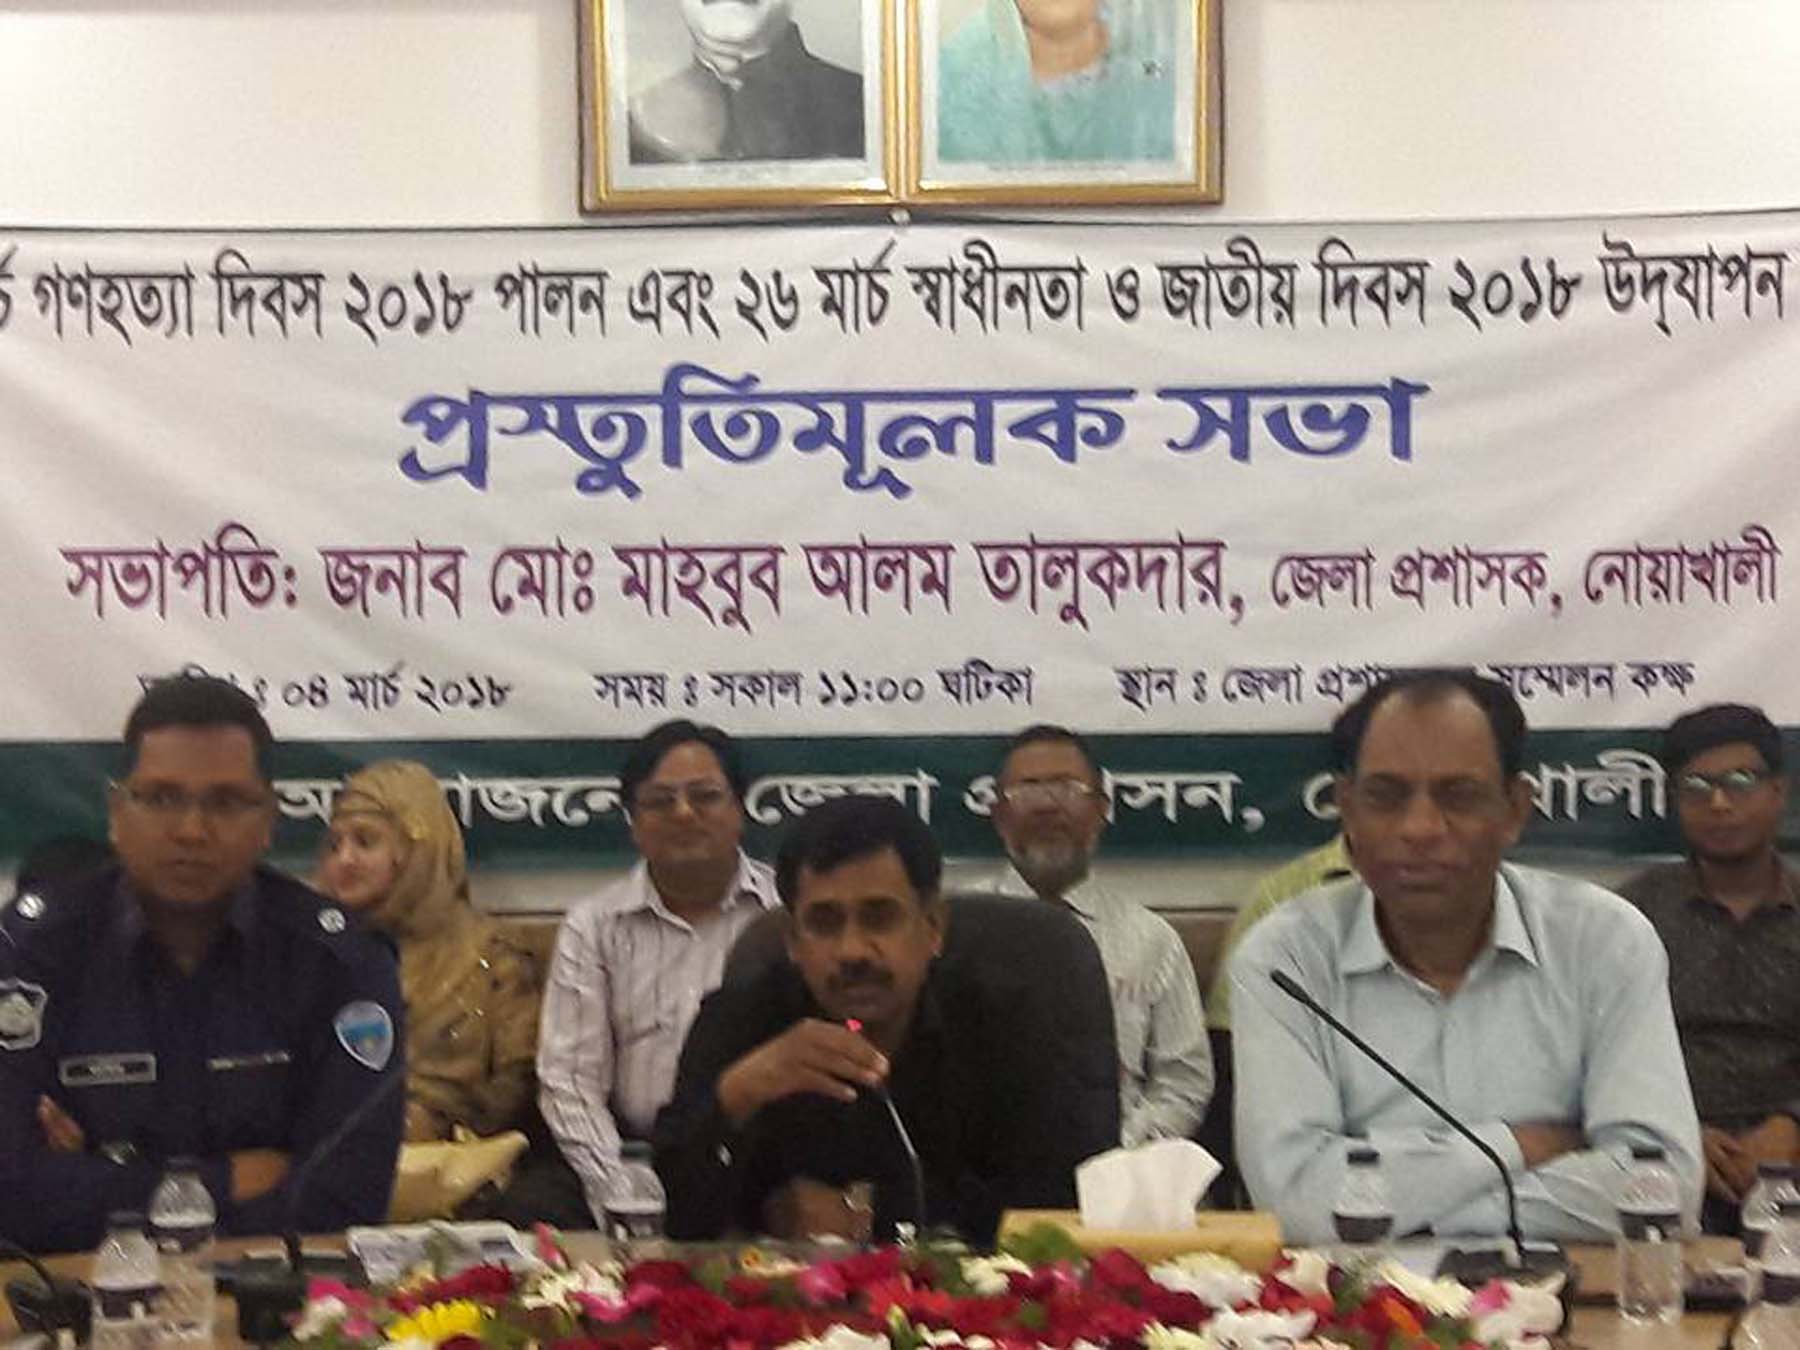 In the picture- Chairman of Begamganj-Sonaimuri Education and Health Development Foundation and Principal, Begumganj Technical & Computer Institute Md. Giash Uddin Mithu with Deputy Commissioner Mahbub Alam Talukdar and Assistant Police Superintendent Zahirul Islam and other leaders attended the independent day and National Day 2018 preparatory meeting.